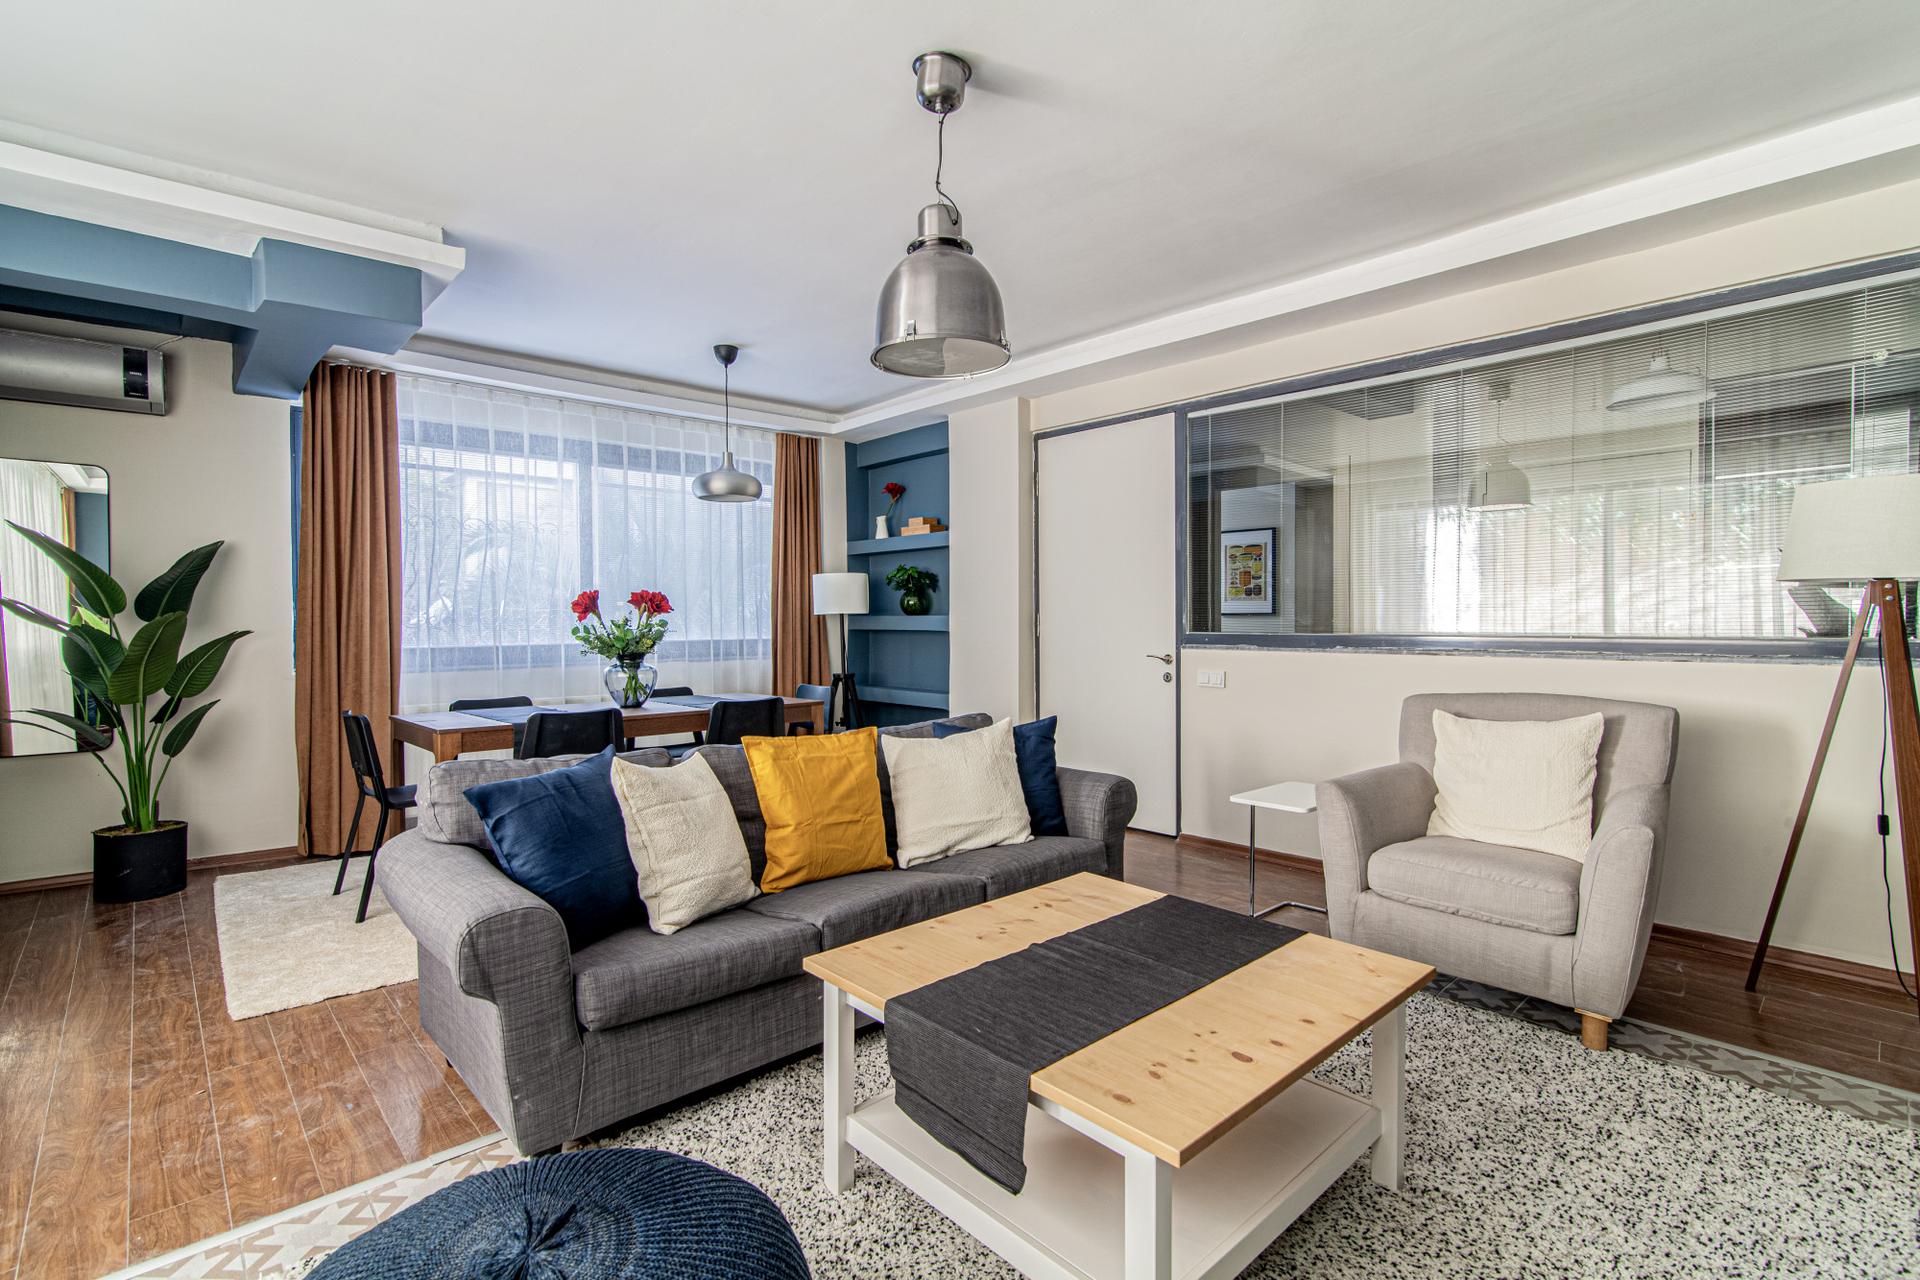 Our sleek flat is ready to host you during your Besiktas adventure.